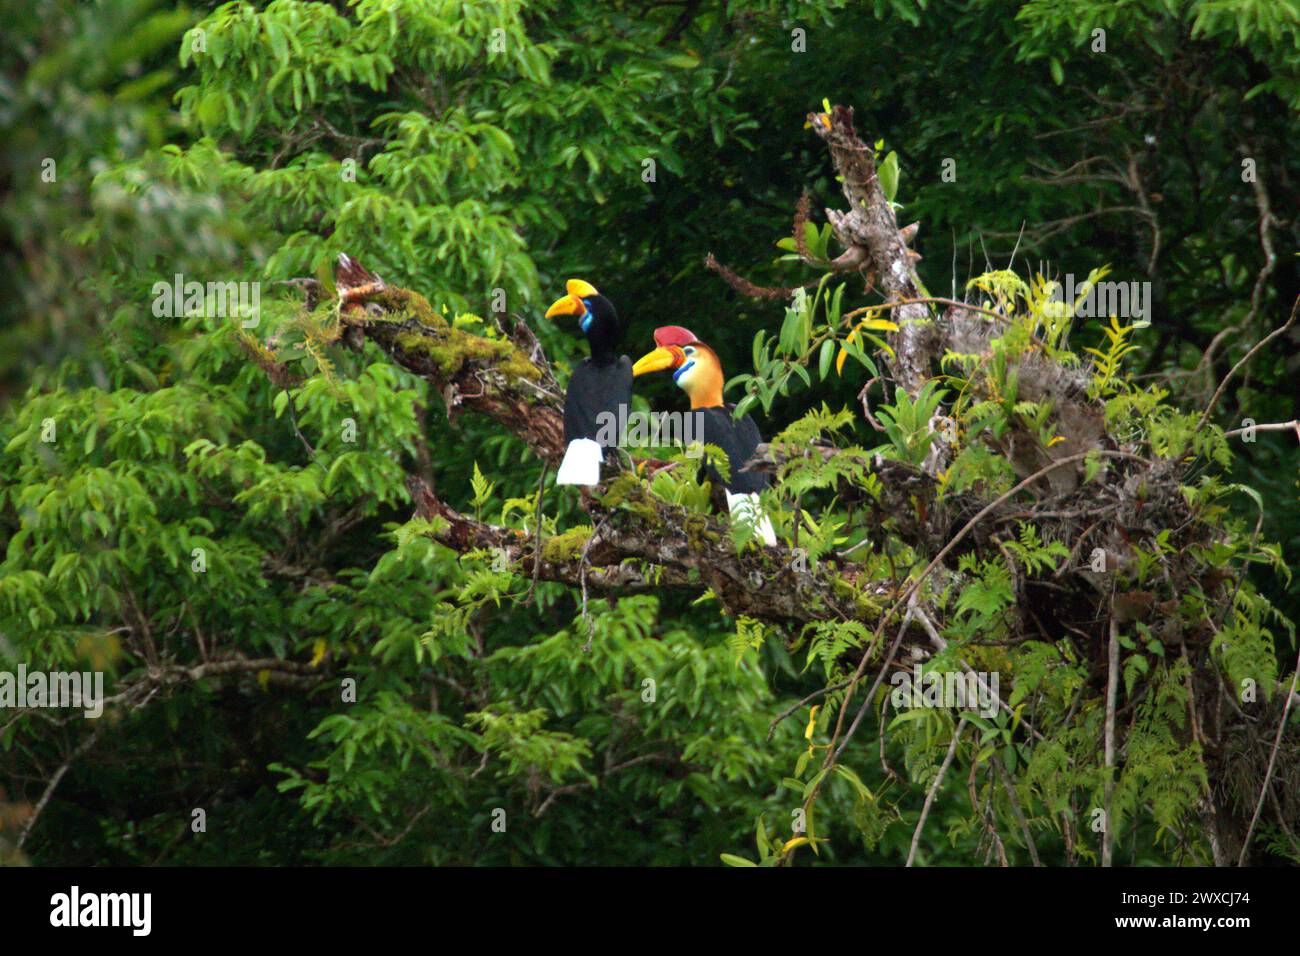 Knobbed hornbills (Rhyticeros cassidix), a pair, on a tree-top in a vegetated area near Mount Tangkoko and Mount Duasudara (Dua Saudara) in Bitung, North Sulawesi, Indonesia. Climate change is altering environmental niches, causing species to shift their habitat range as they track their ecological niche, that could be a disadvantage in terms of effective management for biodiversity, according to Nature Climate Change. A report by a team of scientists led by Marine Joly, based on research conducted since 2012 to 2020, has revealed that the temperature is increasing by up to 0.2 degree Celsius Stock Photo